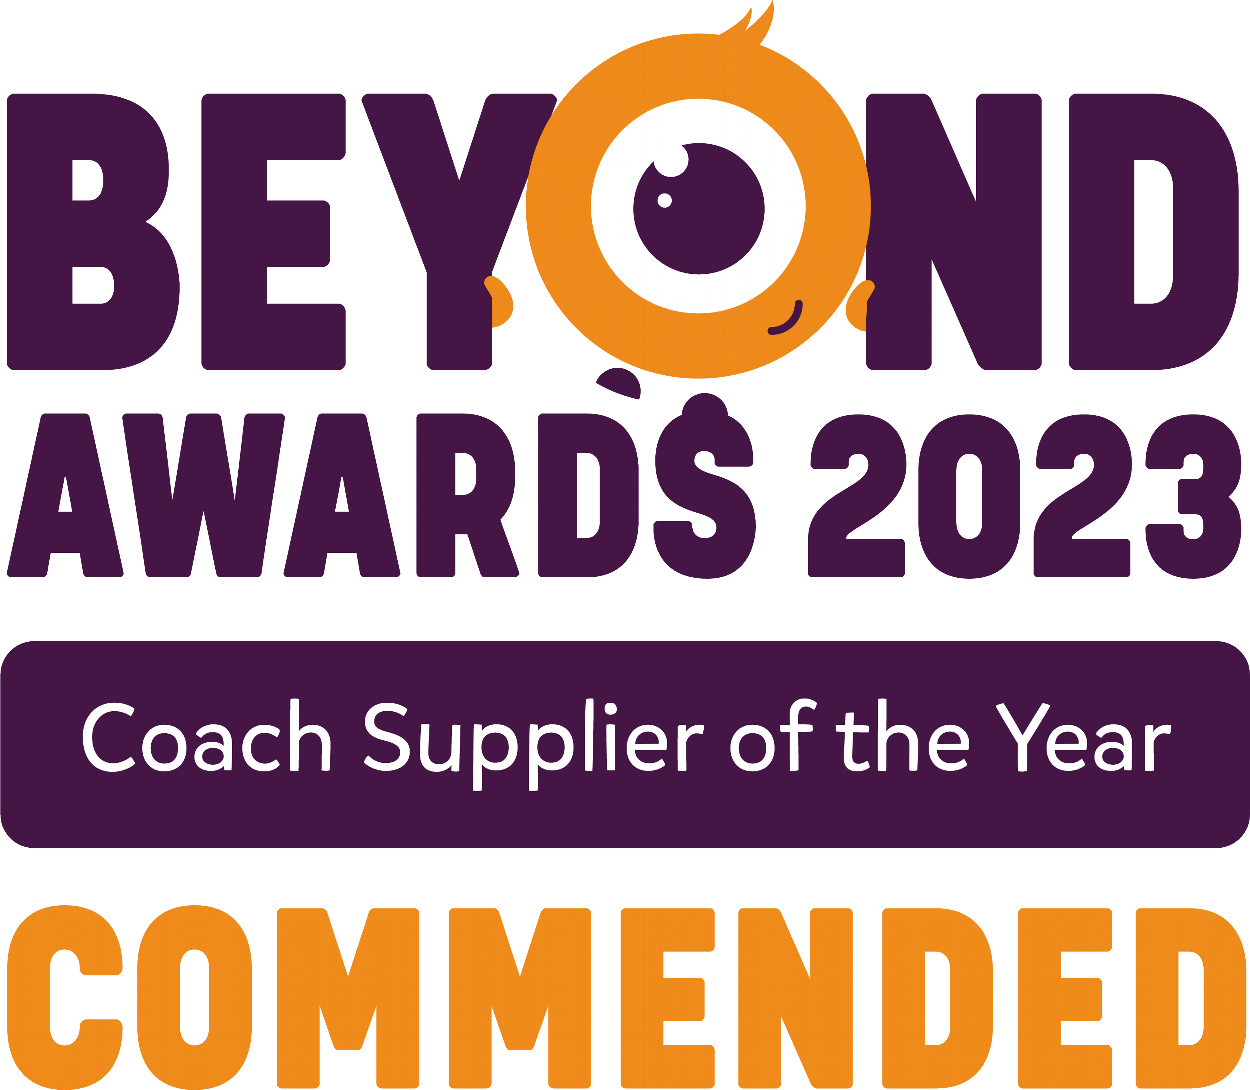 Coach Supplier of the Year 2023 - Beyond Awards Logo